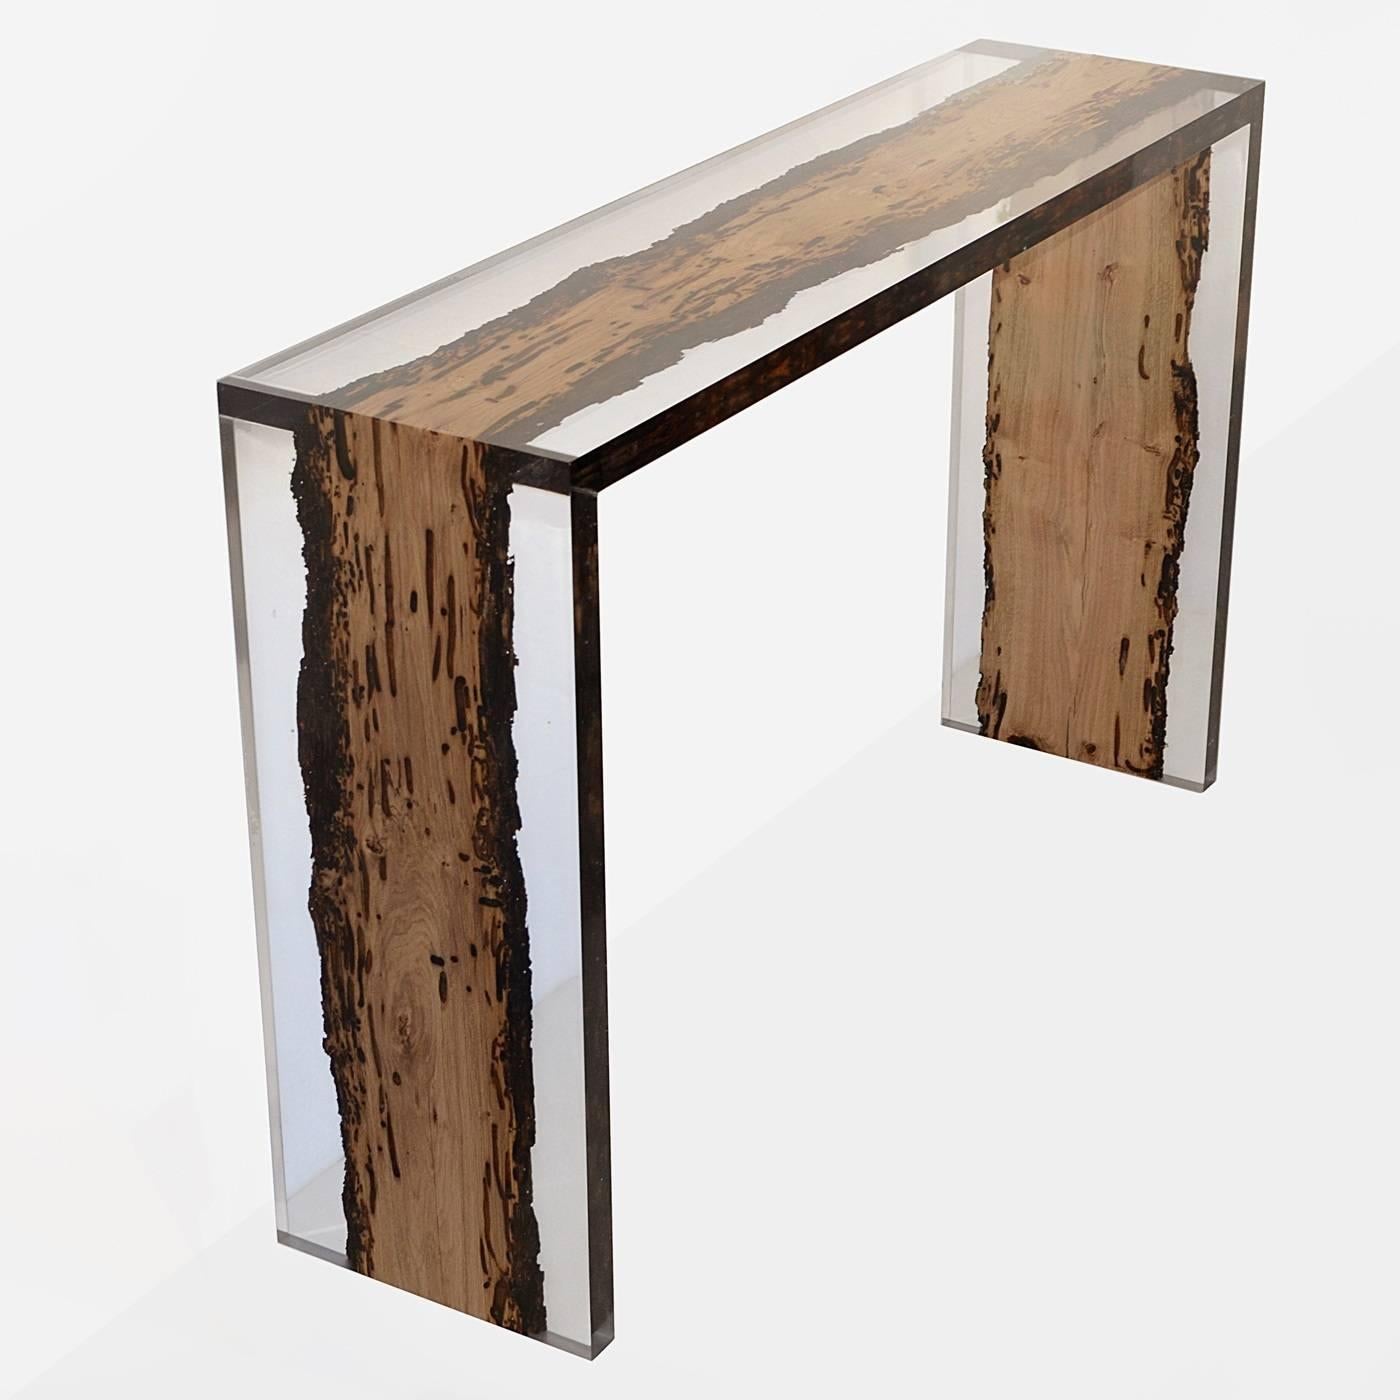 This console is made of a single plank of Venetian 'briccola', solid oak, used to make poles in the laguna, that has been cut into three parts and bent to obtain the table's shape. The edges of the plank, sculpted by the canals of Venice, are